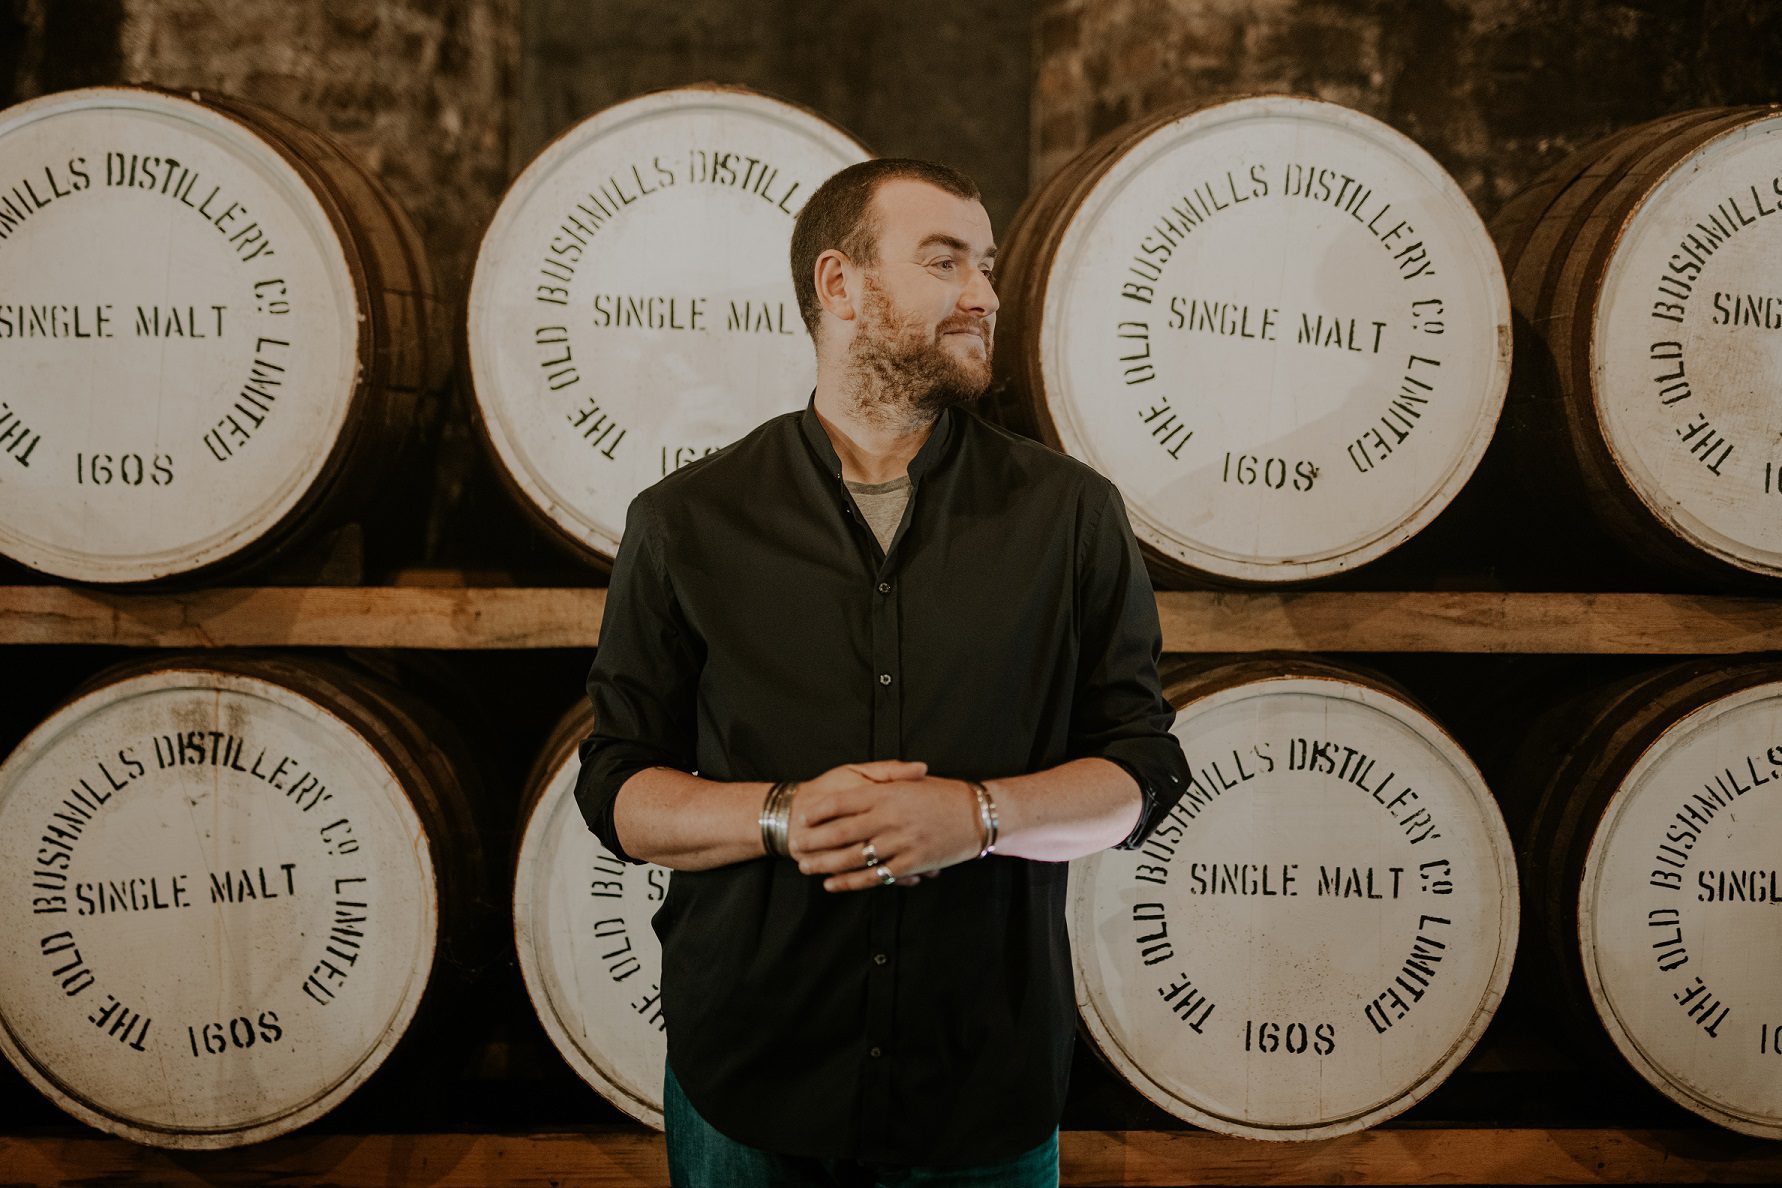 Bushmills Irish Whiskeyis Set to Make Waves Again with Its New Series of Exclusive and Elusive Single Malt Causeway Collection Releases for 2021 International Whiskey Reviews by Irish Whiskey Blogger Stuart Mcnamara